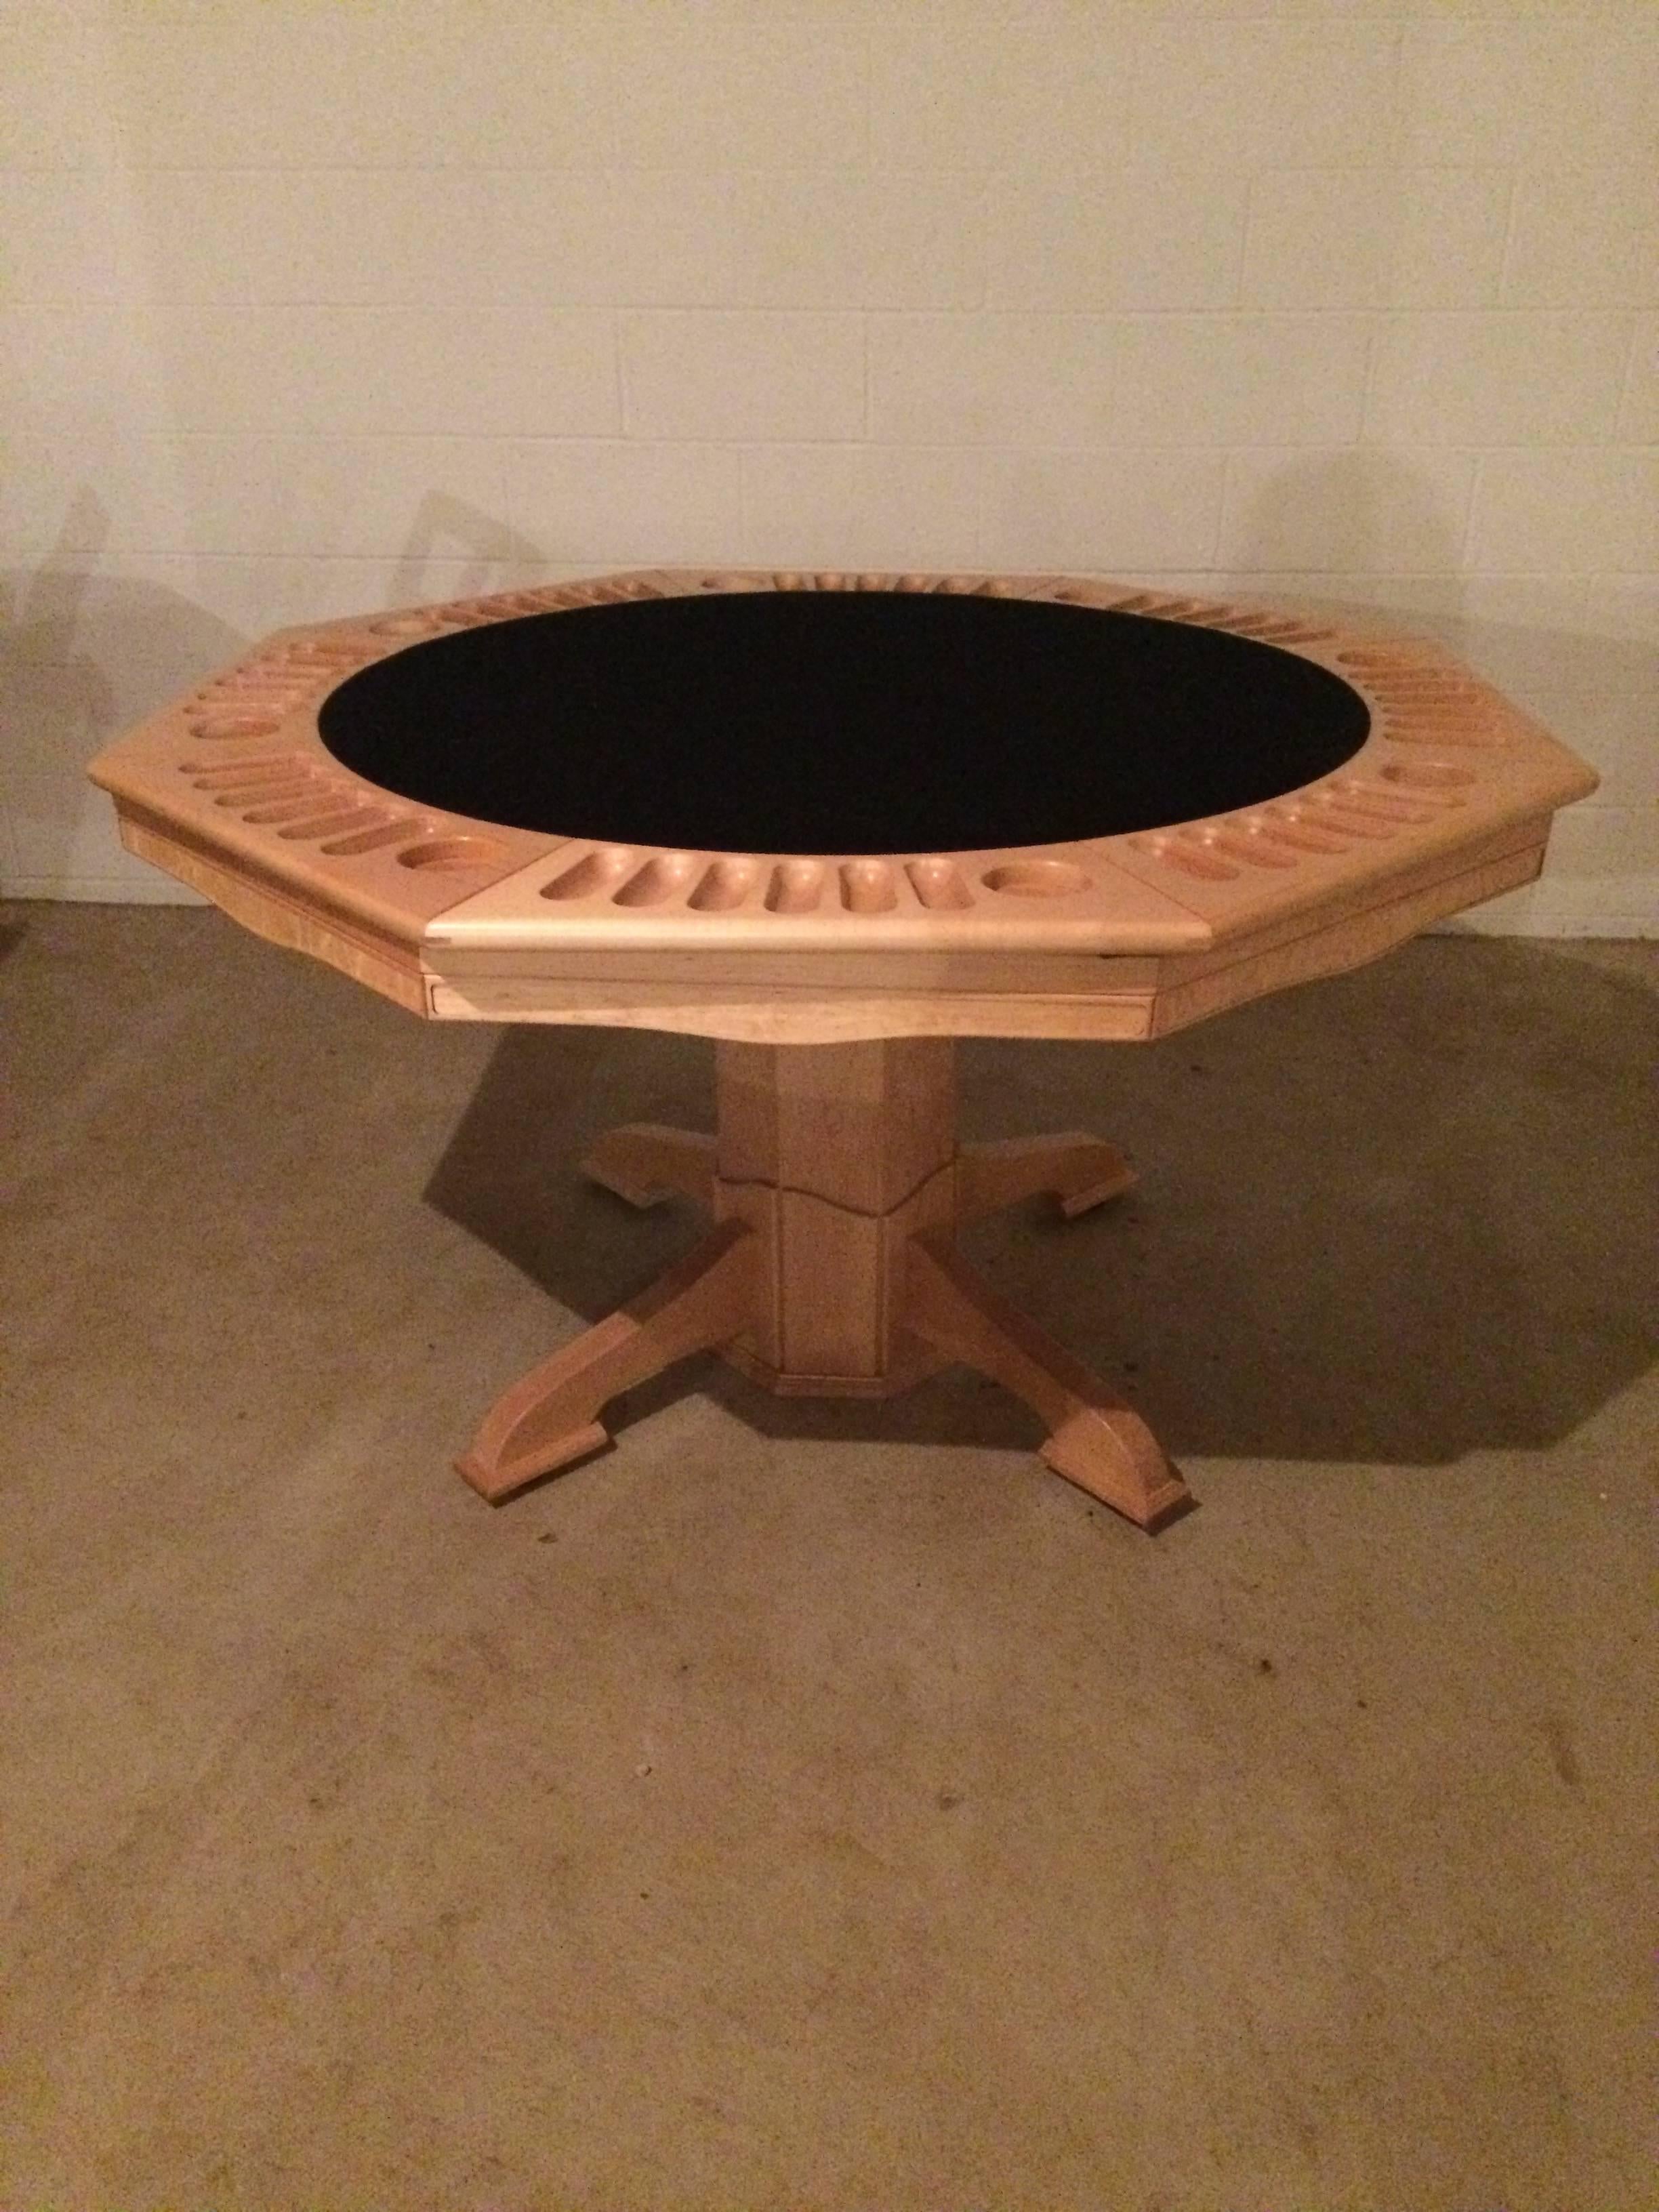 Very glamorous and beautifully constructed octagonal Carpathian Maple game table having one side outfitted for playing poker with black felt and indentations for chips, coins, cards and the like. The top lifts off and have a backgammon board on the